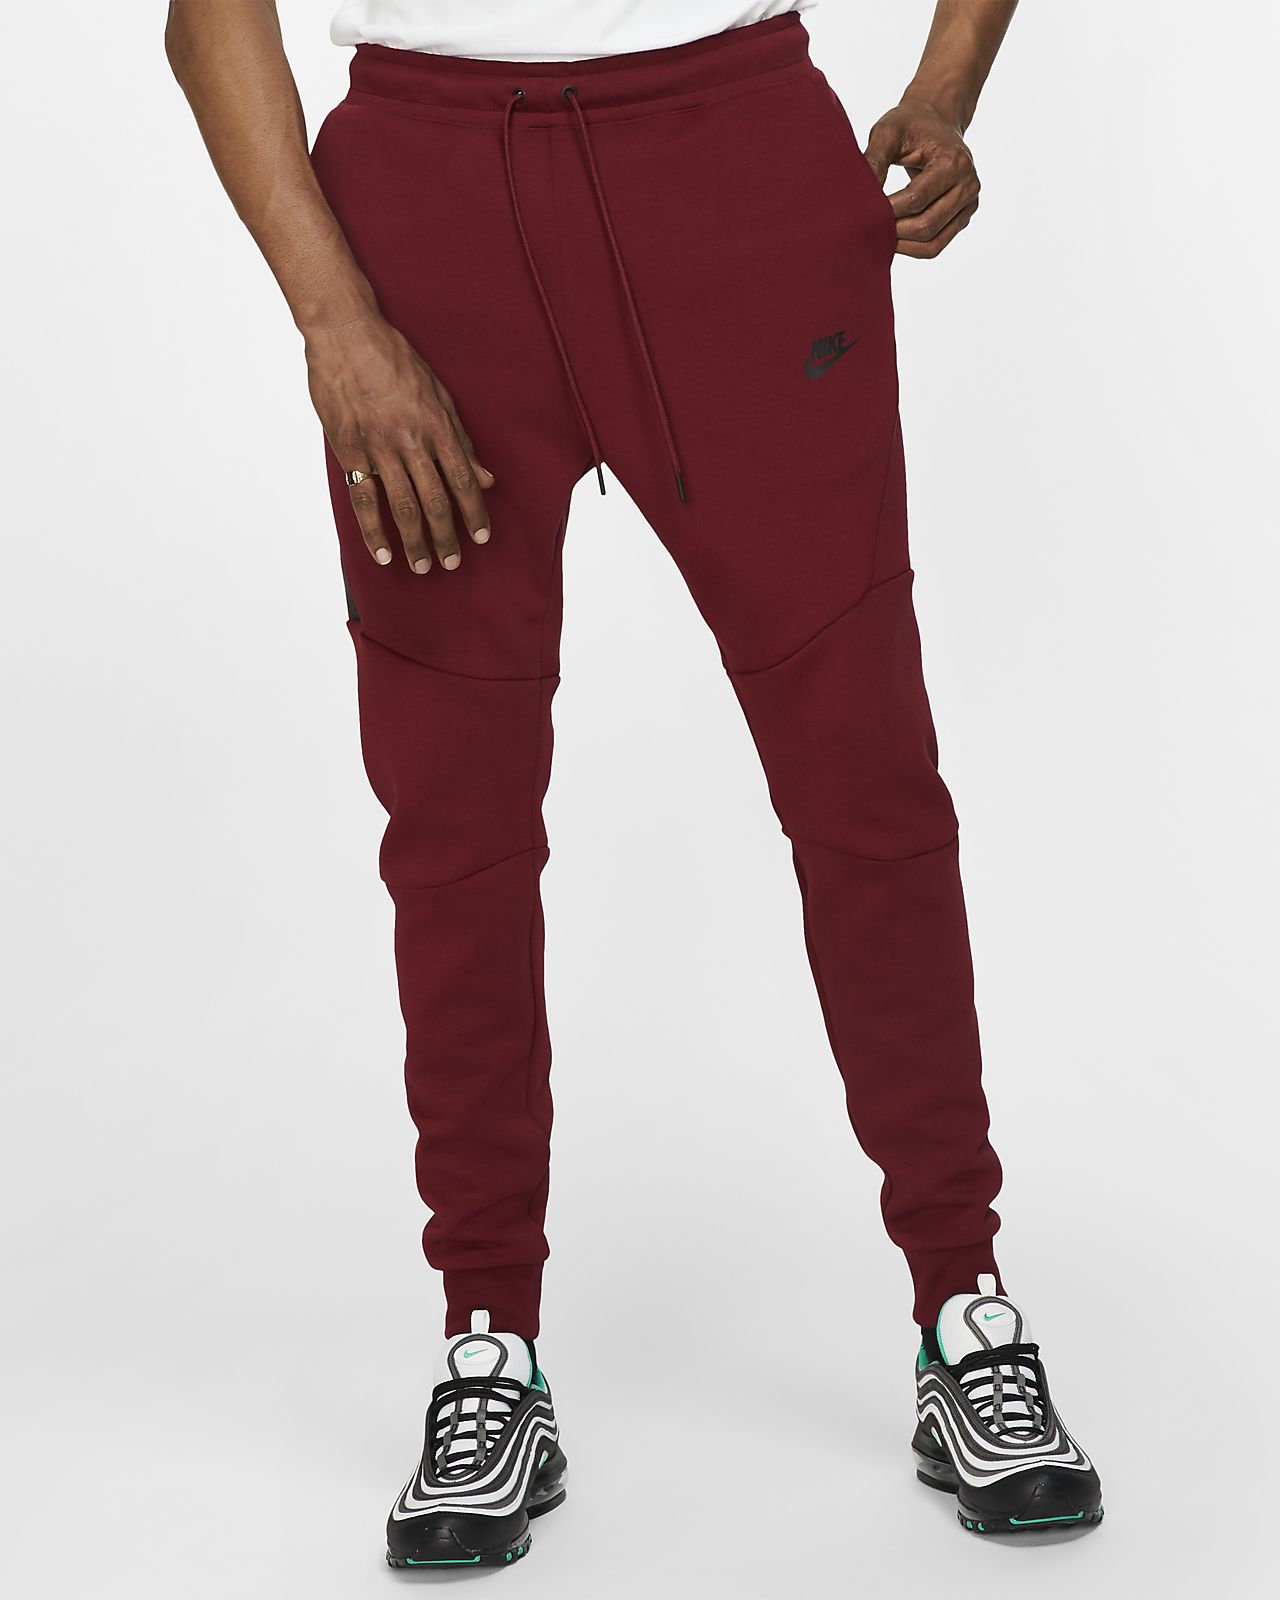 nike red joggers